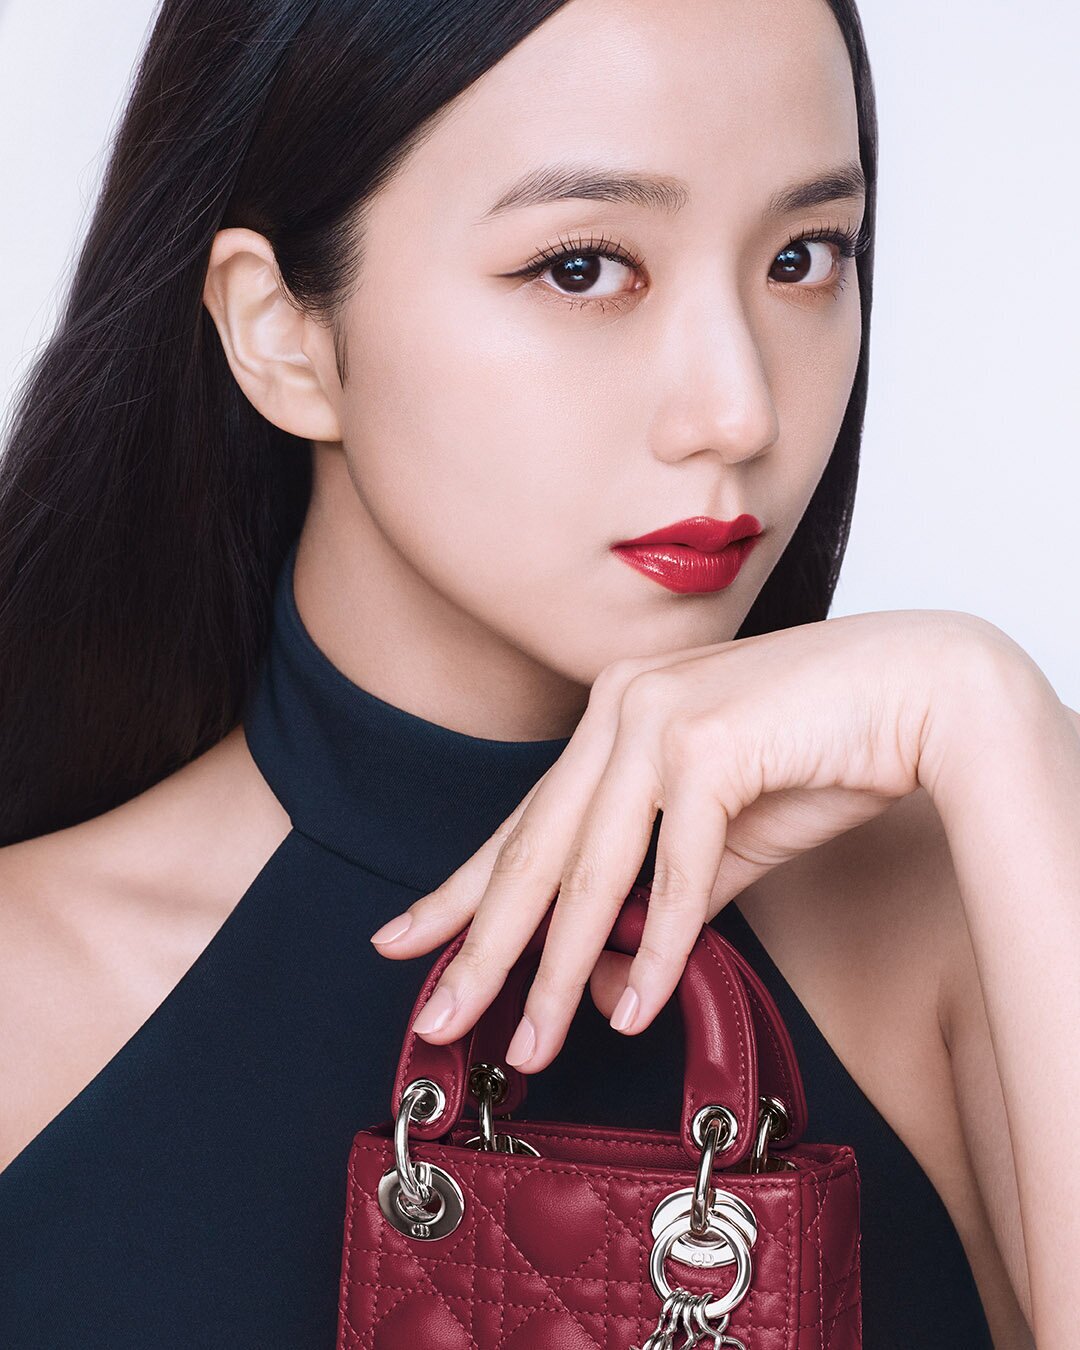 BLACKPINK JISOO for DIOR Addict Campaign | kpopping